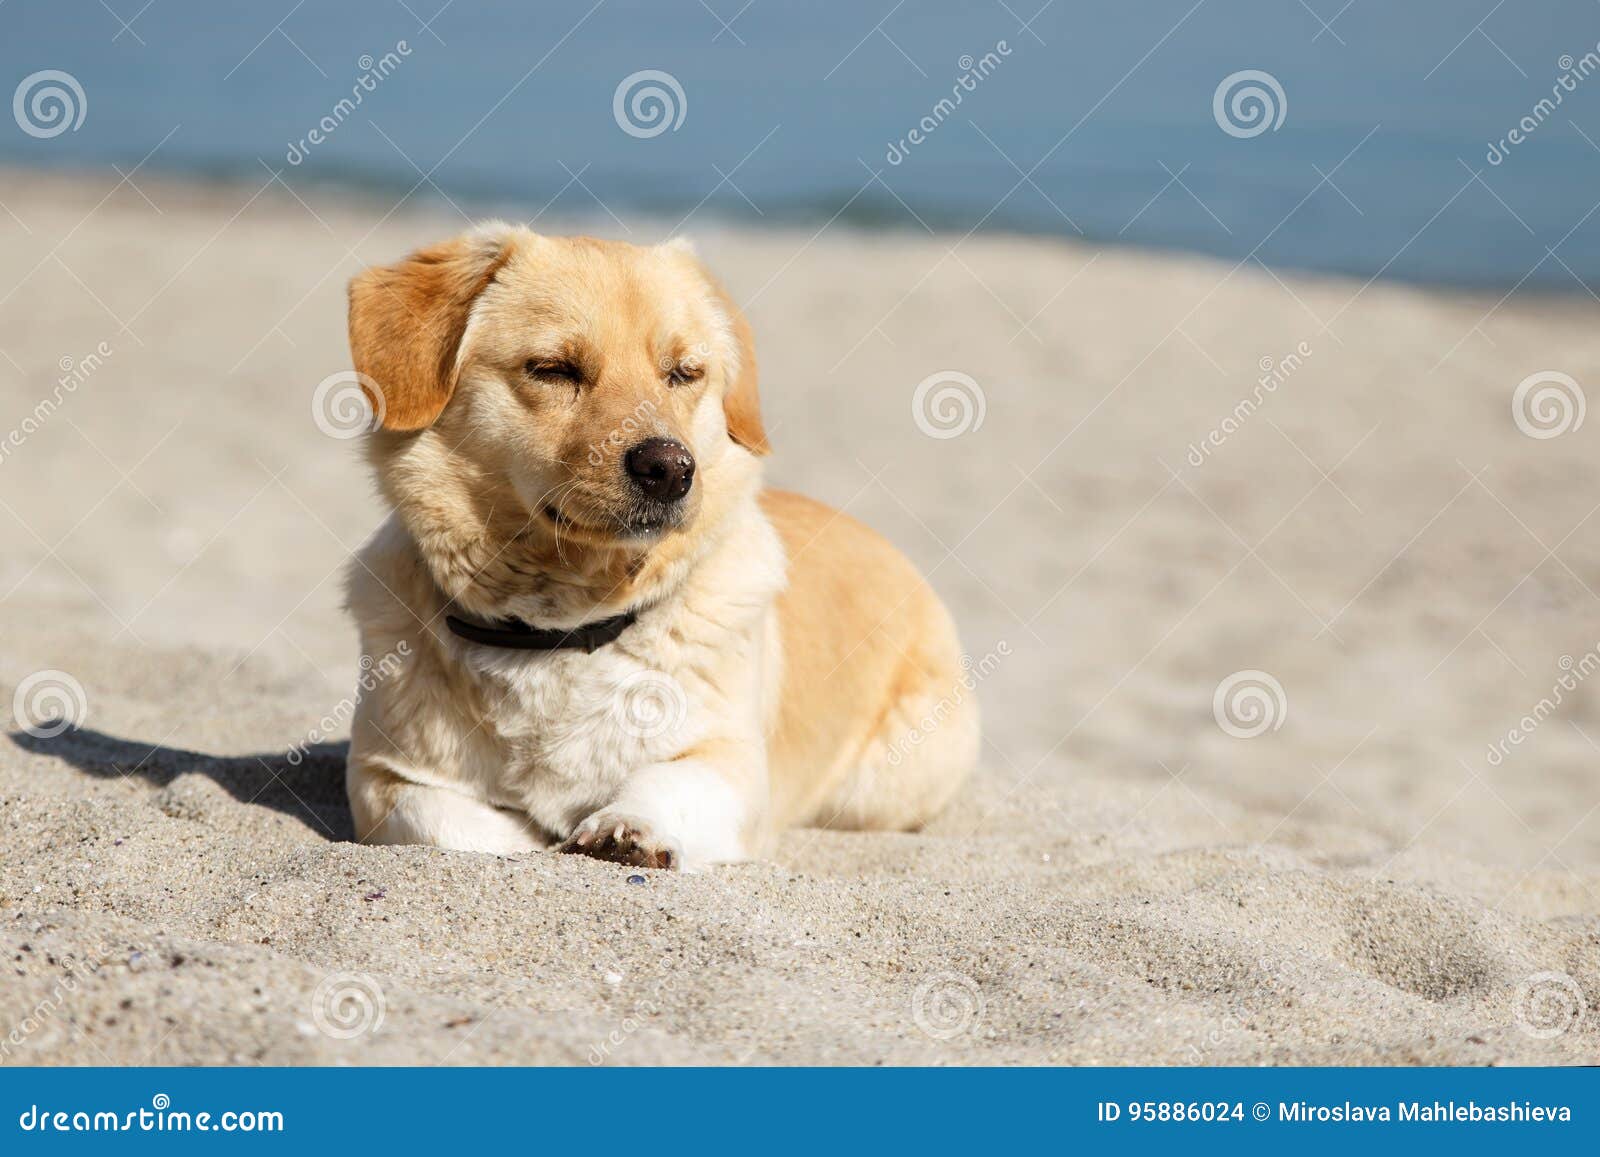 cute mix breed dog lying on the beach with closed eyes from pleasure of the sun and the warm weather. copy space